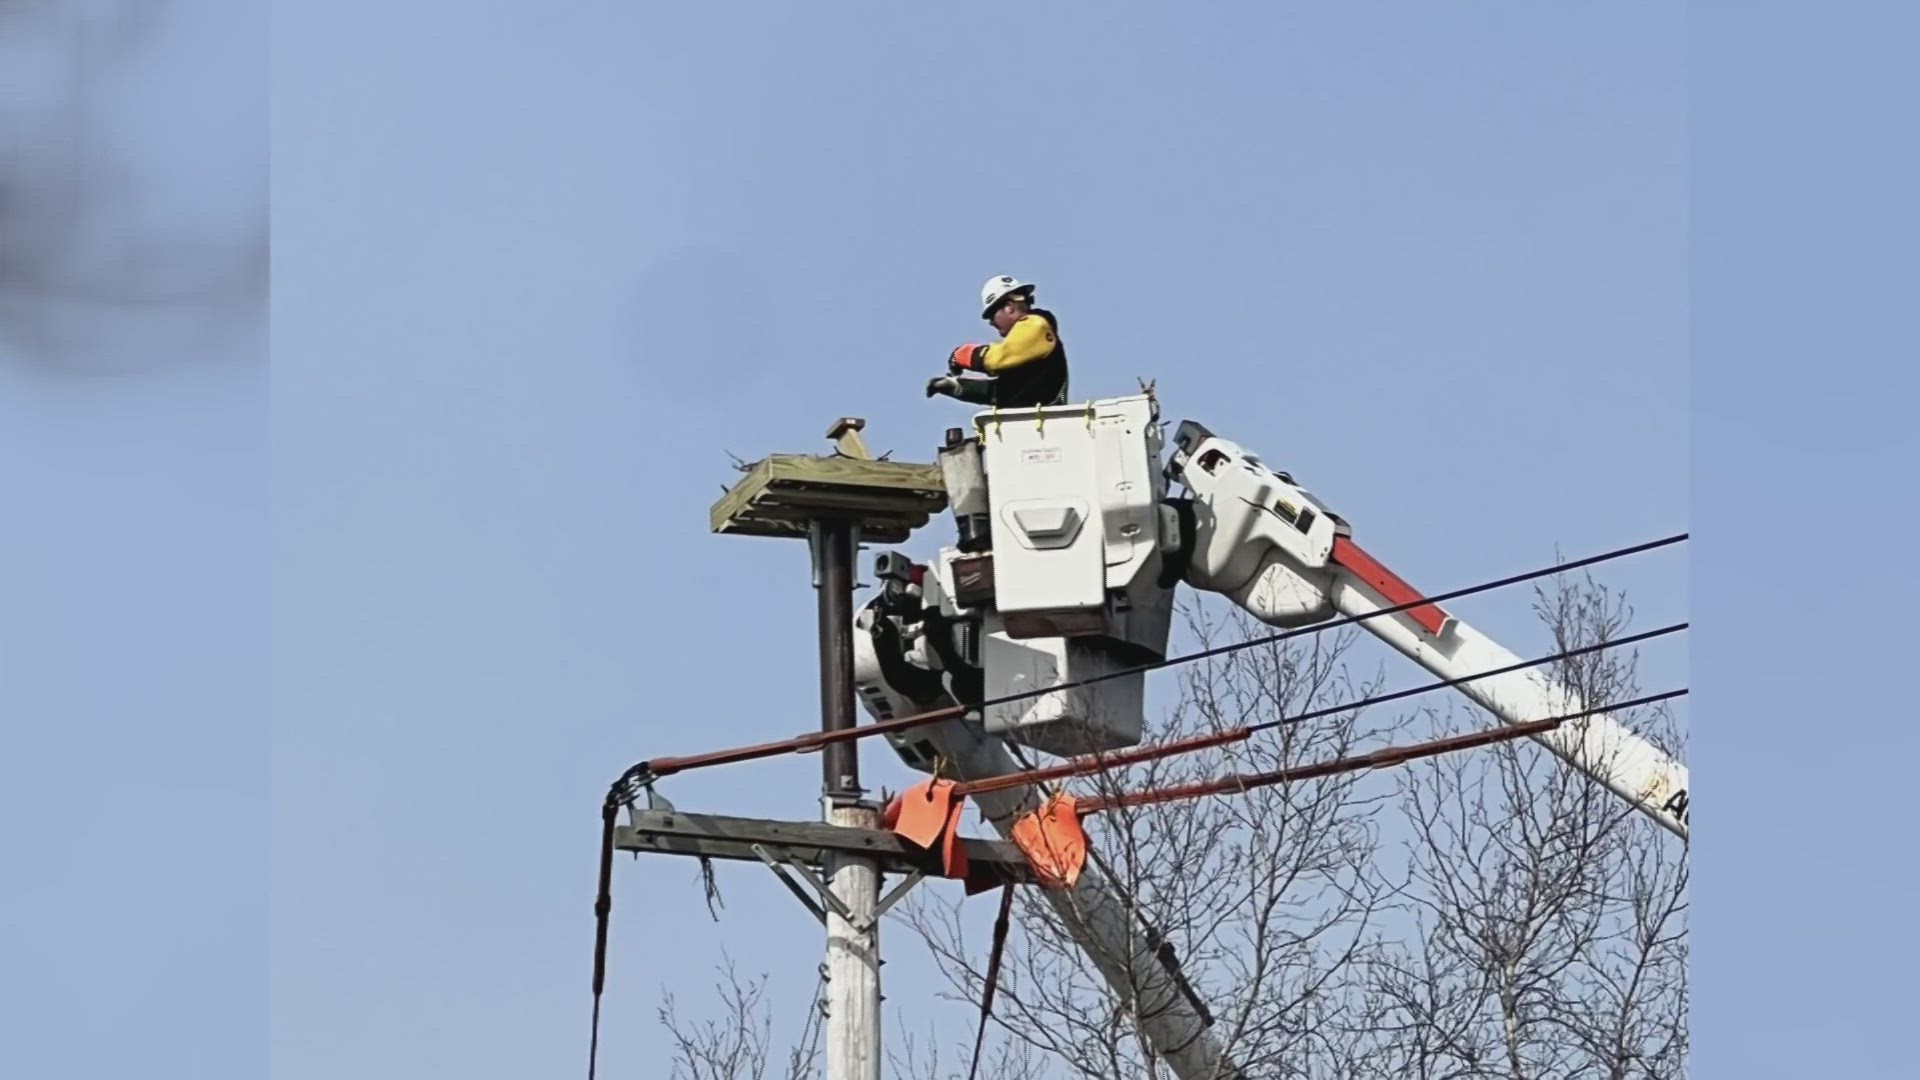 CMP said they removed the nest because it wasn't safe for the birds to remain on the powerline after recent storms.